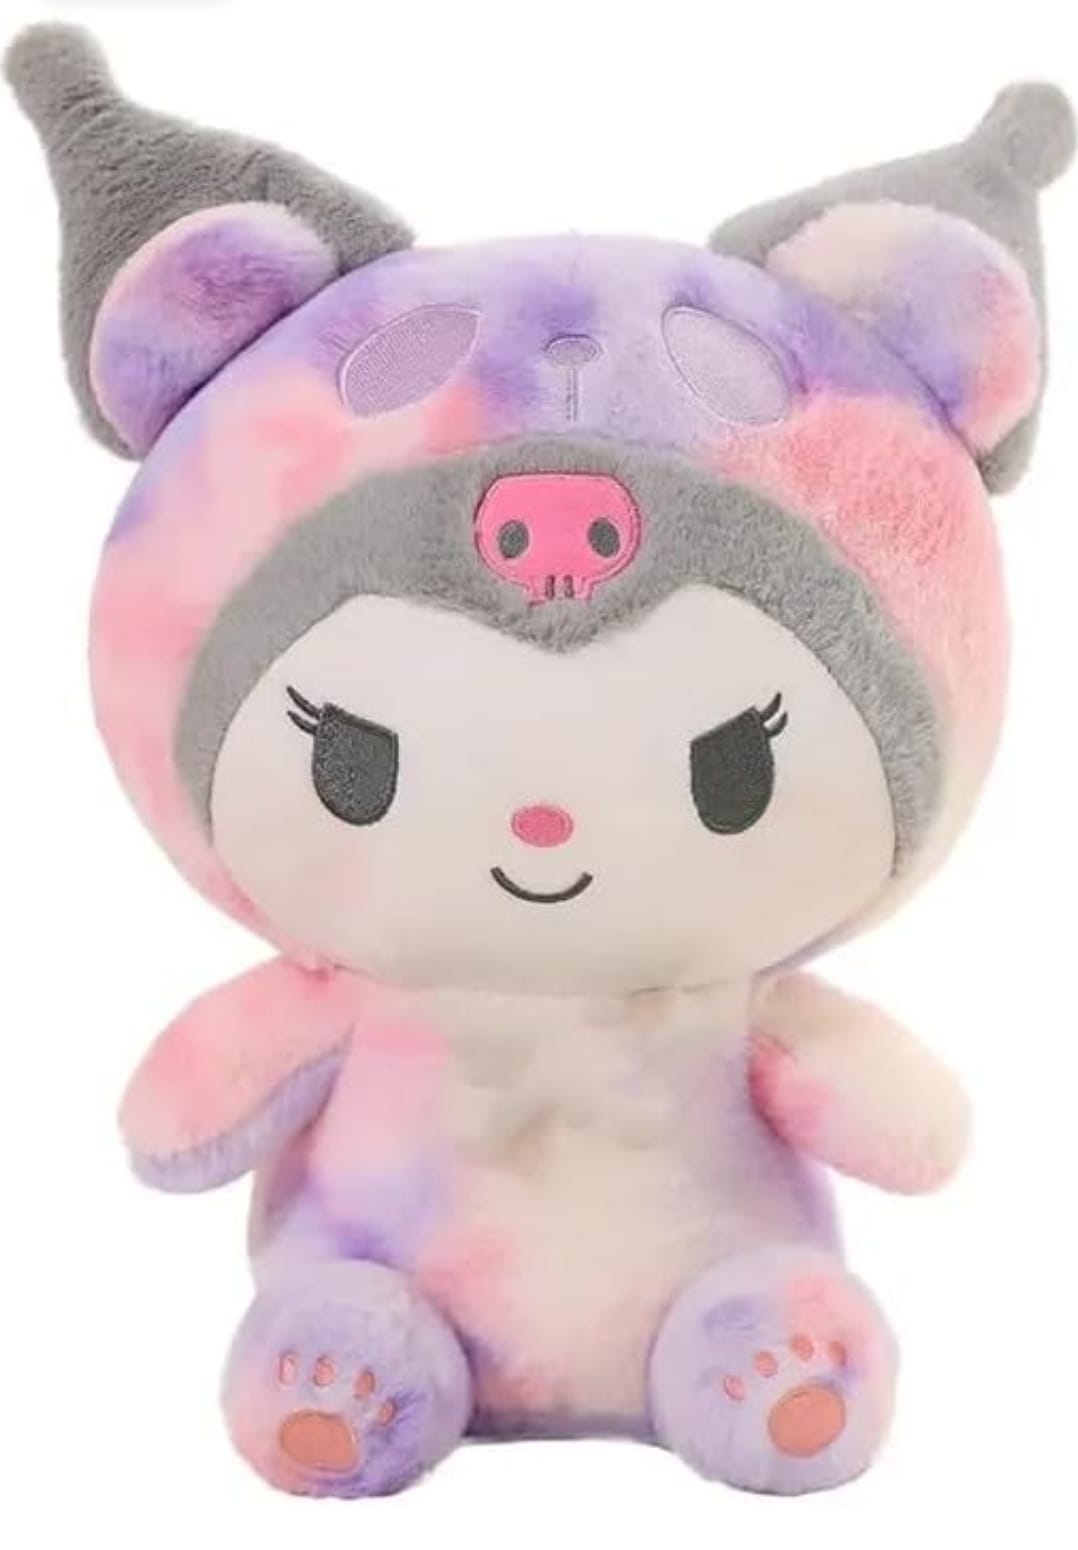 "Kuromi Plush - Embrace the Edgy Charm of Sanrio's Mischievous Darling!"